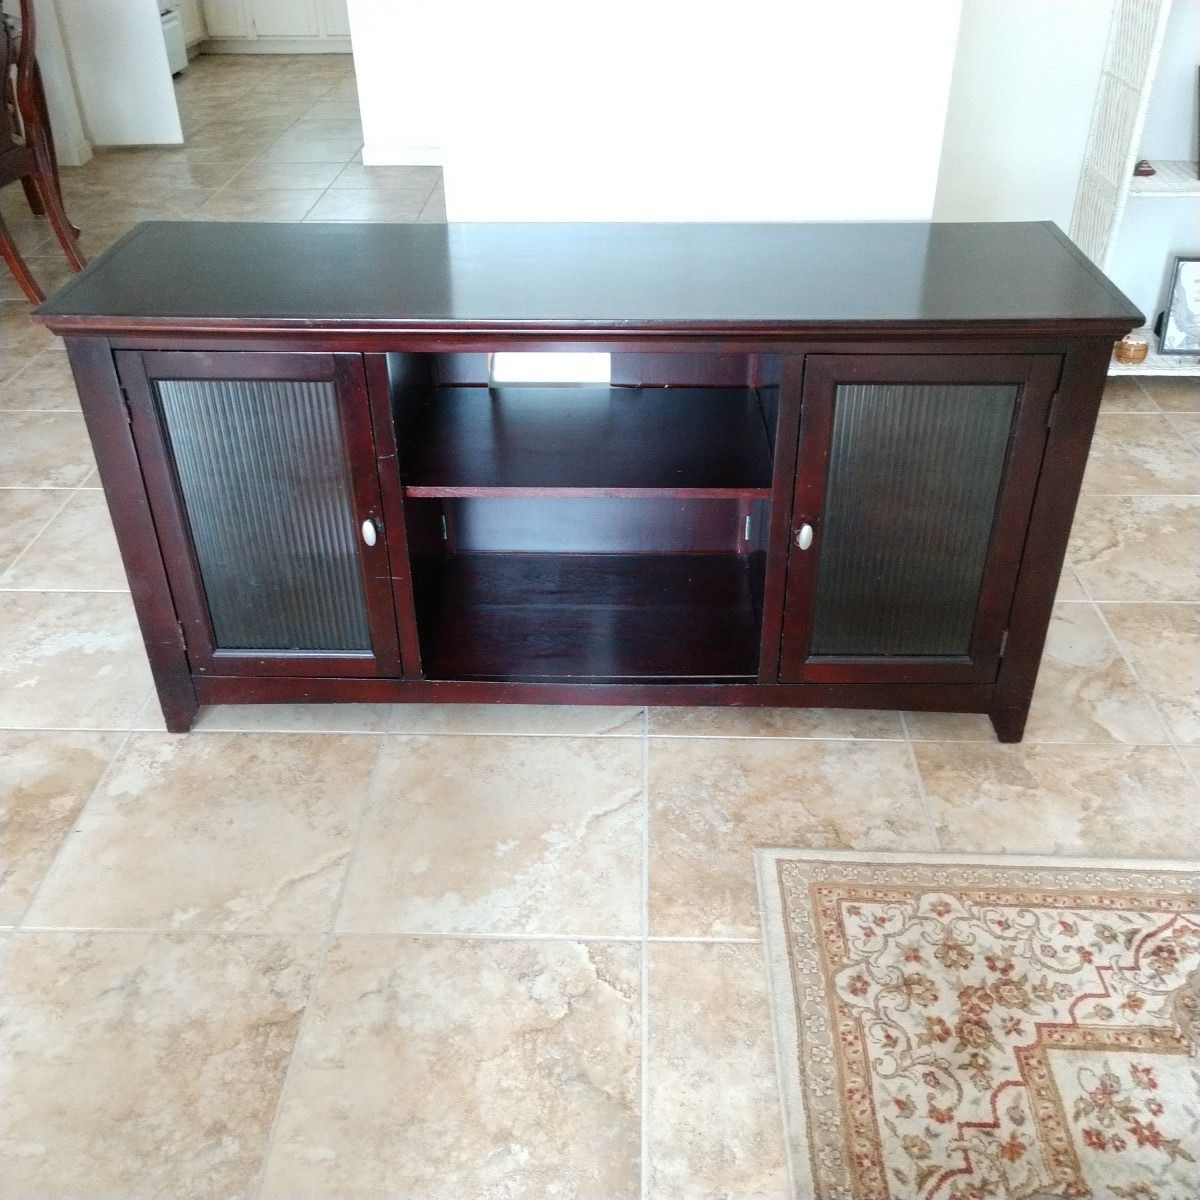 Sturdy entertainment center tv table cabinet with privacy glass door strong cherry color